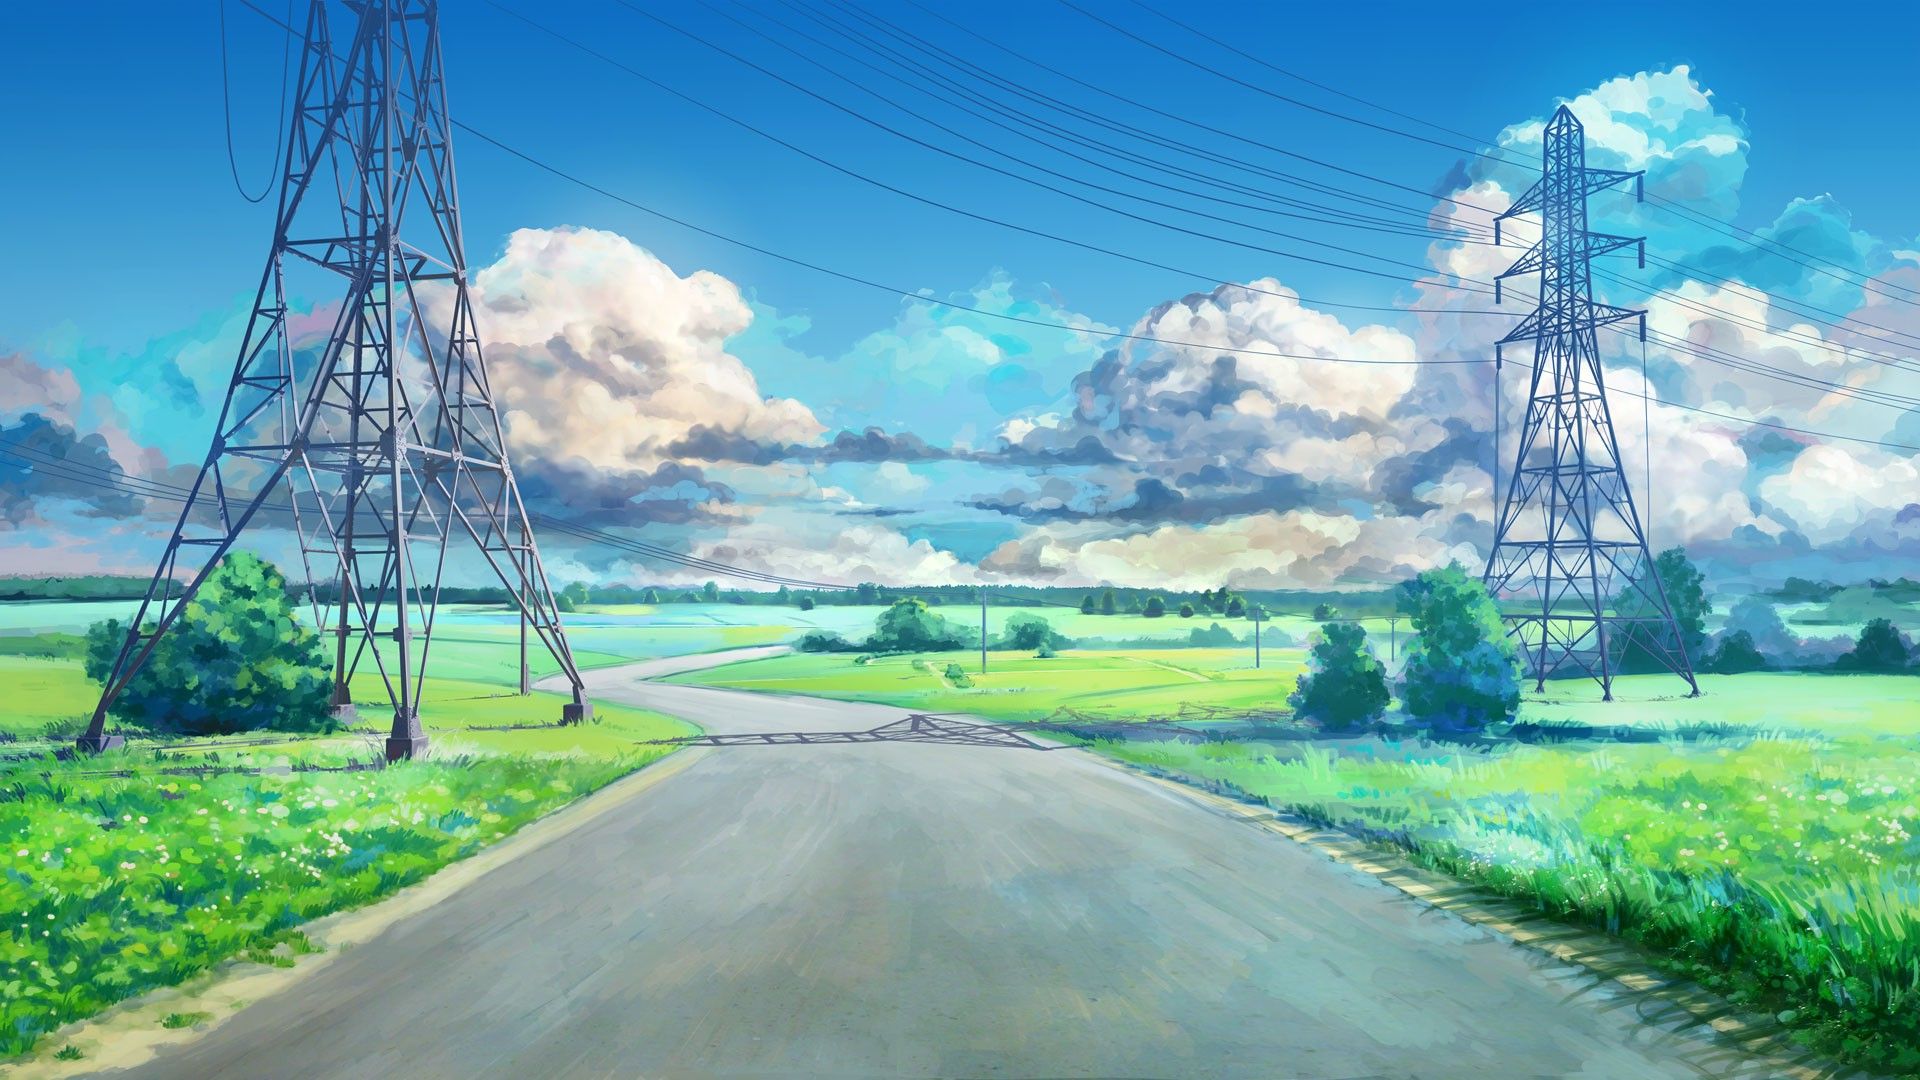 clouds, Blue, Green, ArseniXC, Anime, Landscape, Road, Power Lines